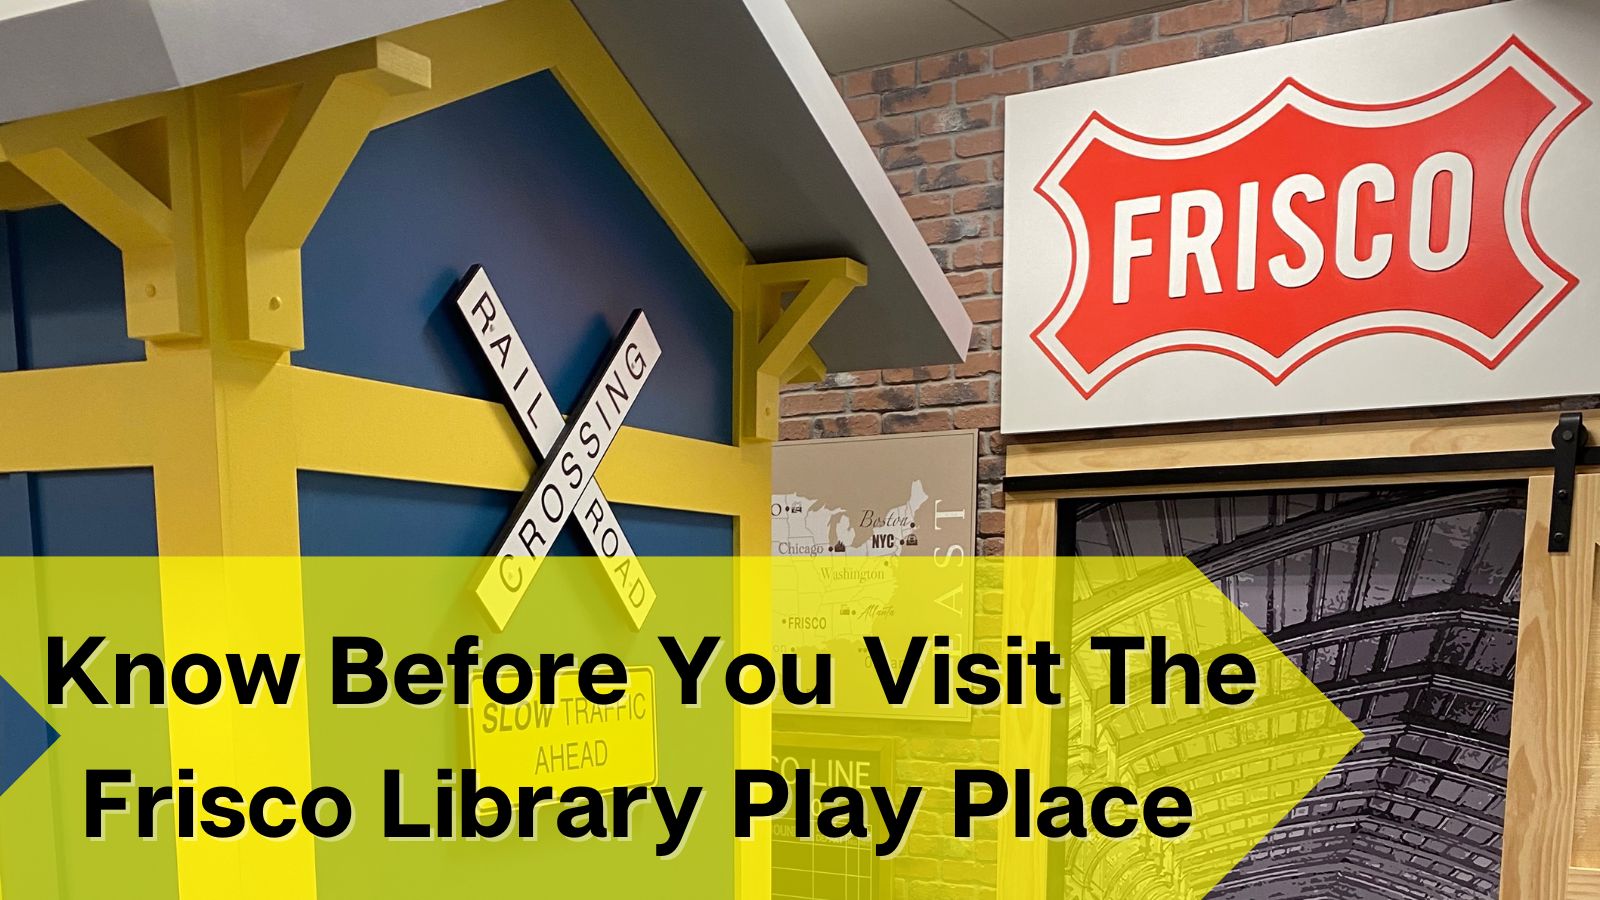 Know before you visit the frisco library play place